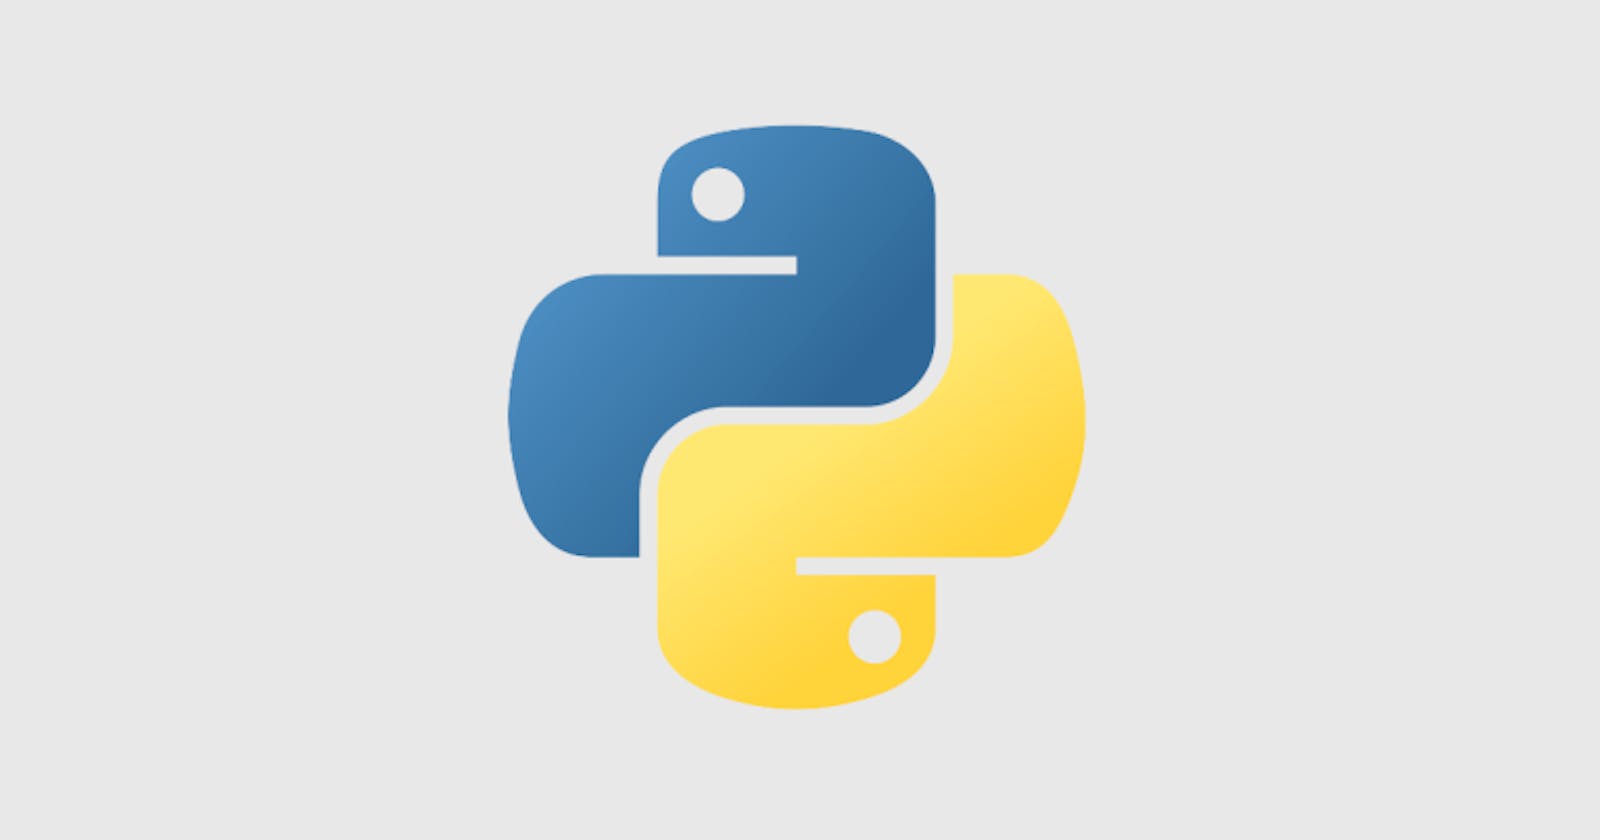 Object  instantiation process in Python